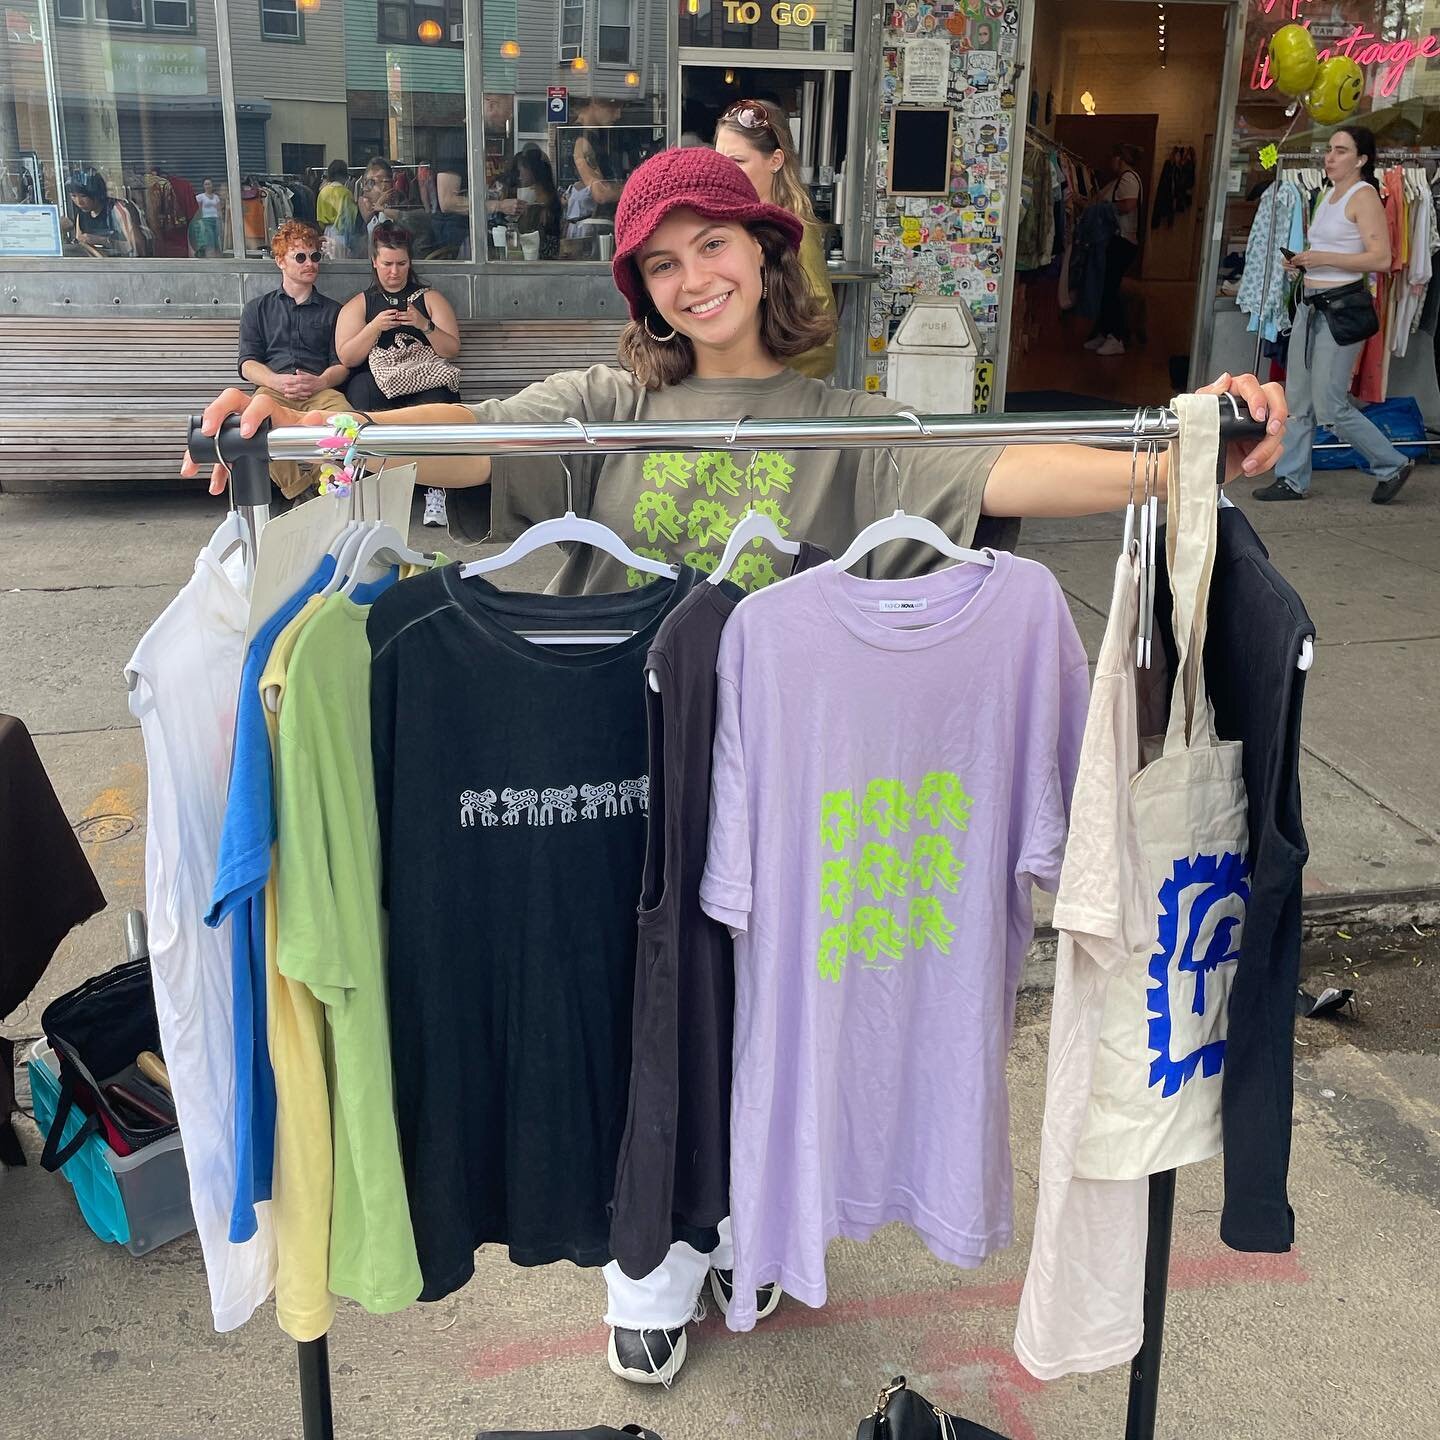 Thanks to everyone who said hi at our pop up today☀️Check us out at 18 Bedford Ave in Brooklyn every weekend this summer! 

If you&rsquo;re not in New York, you can still shop, link in bio!